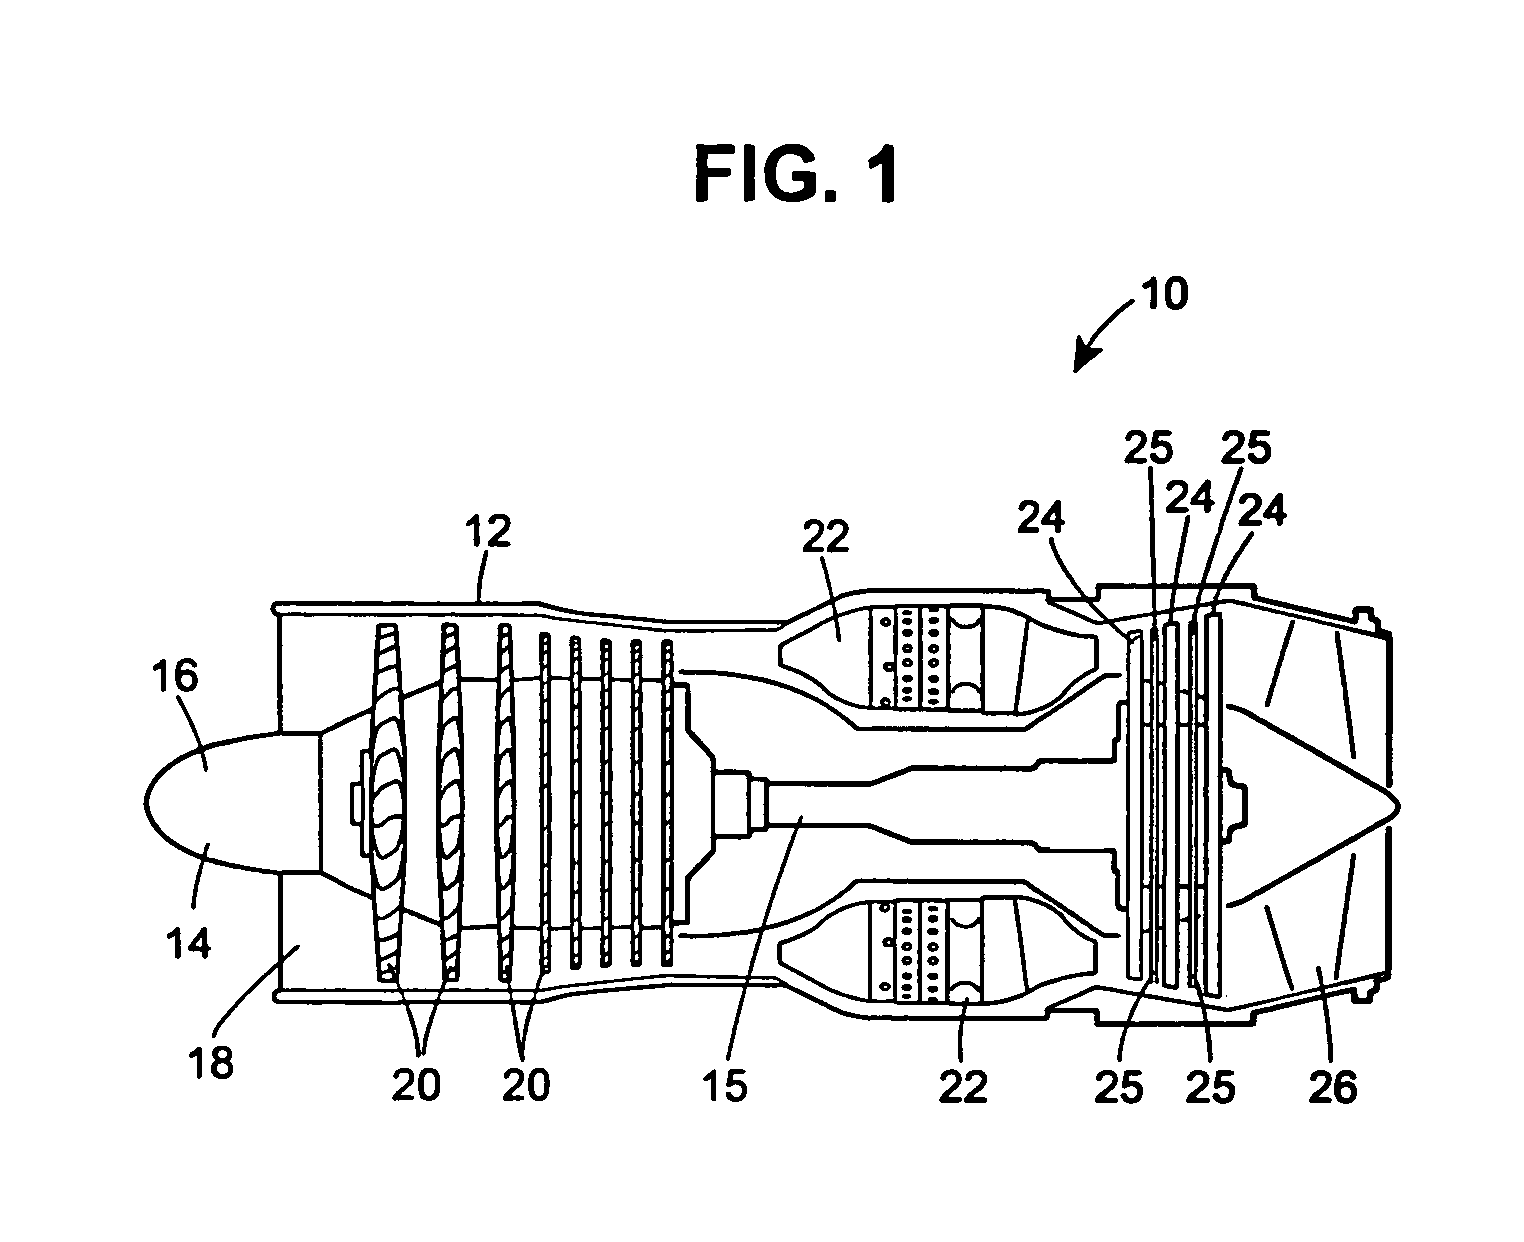 Apparatus and method for reducing operating stress in a turbine blade and the like